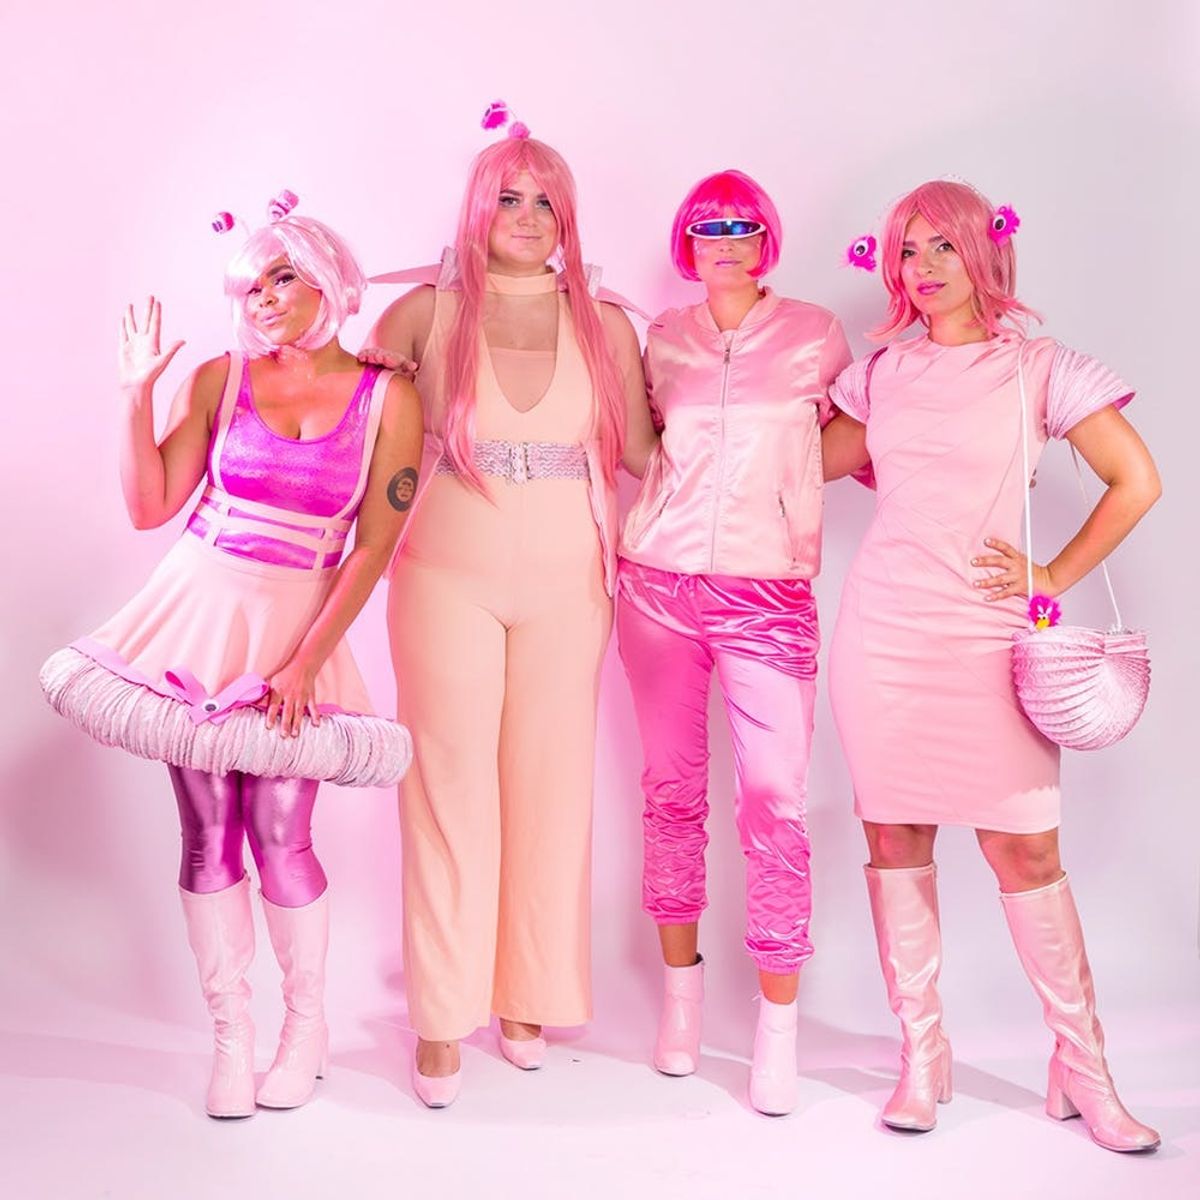 Celebrate Halloween 2017 With This Futuristic Millennial Pink Group ...